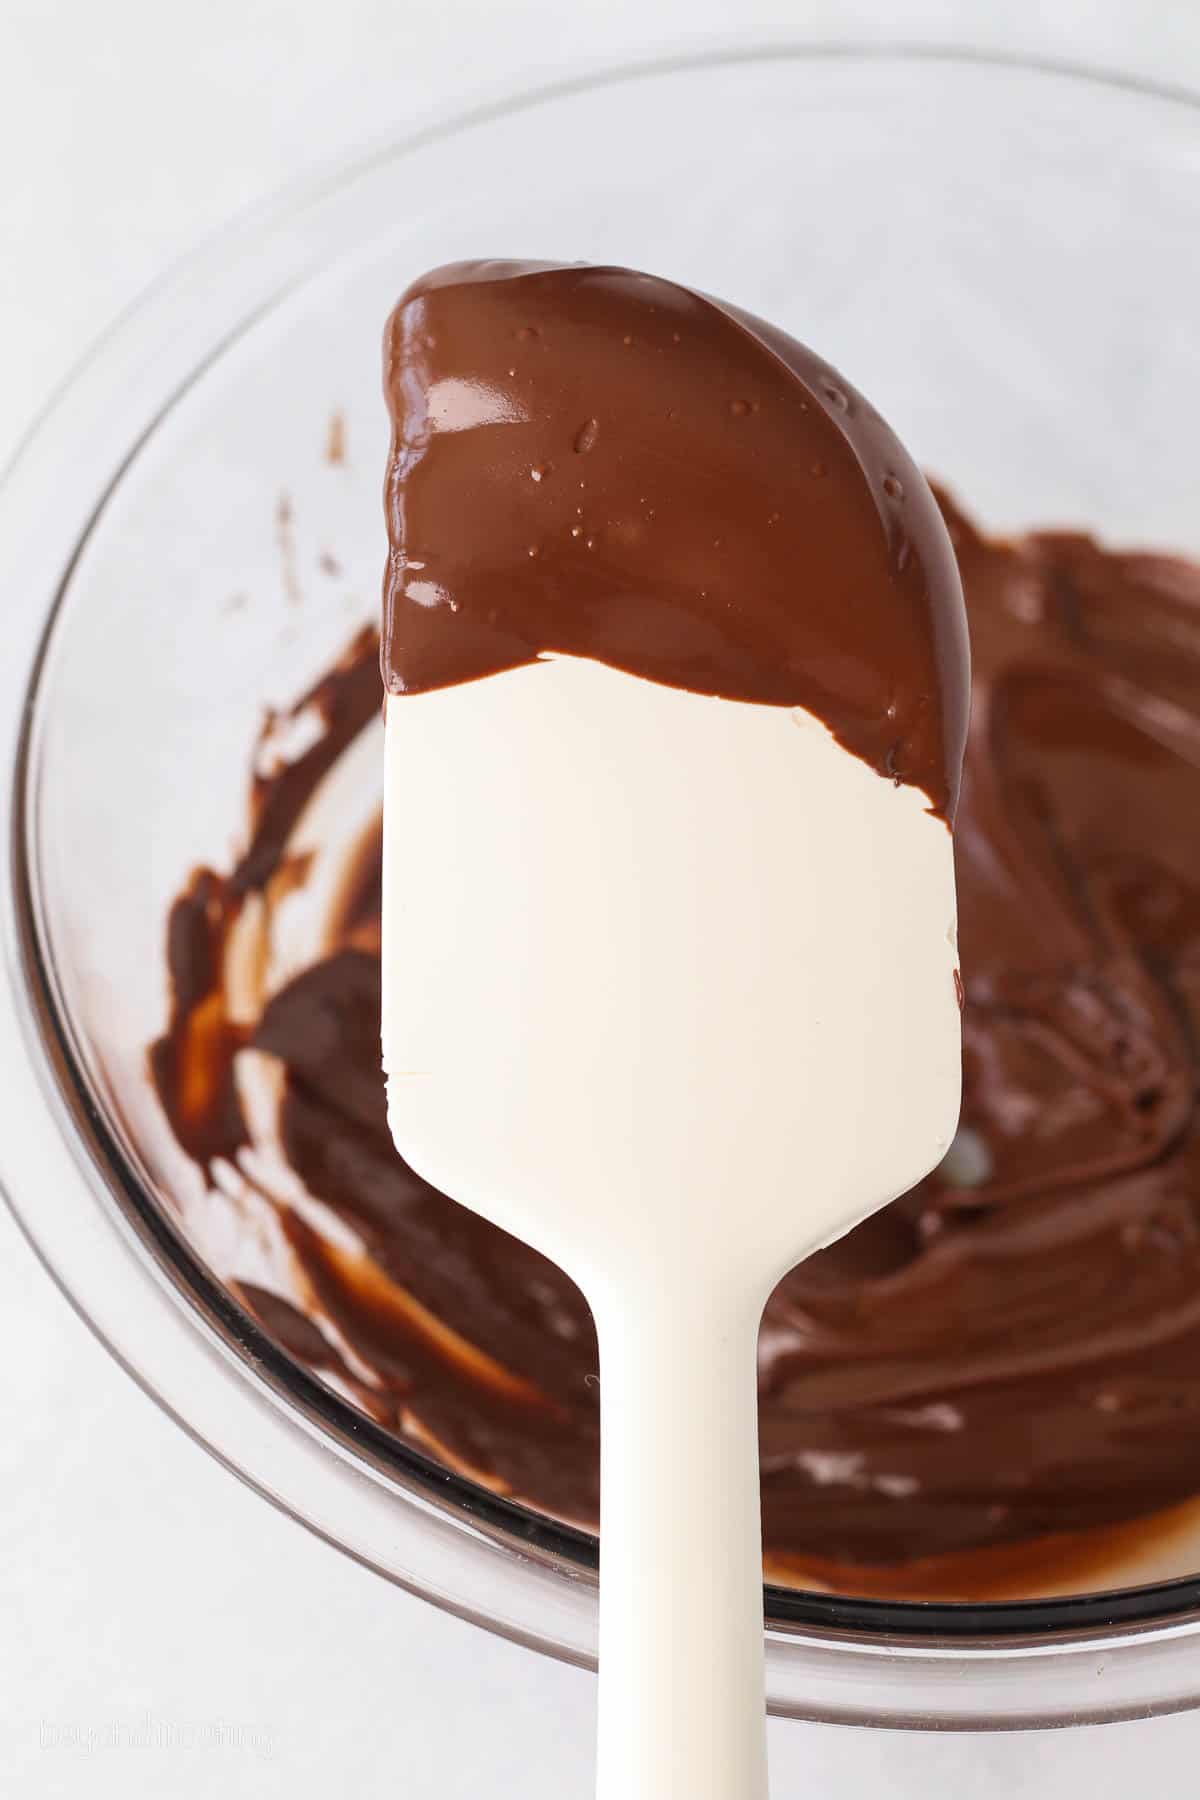 Melted chocolate on a white rubber spatula, held over a bowl of melted chocolate in the background.